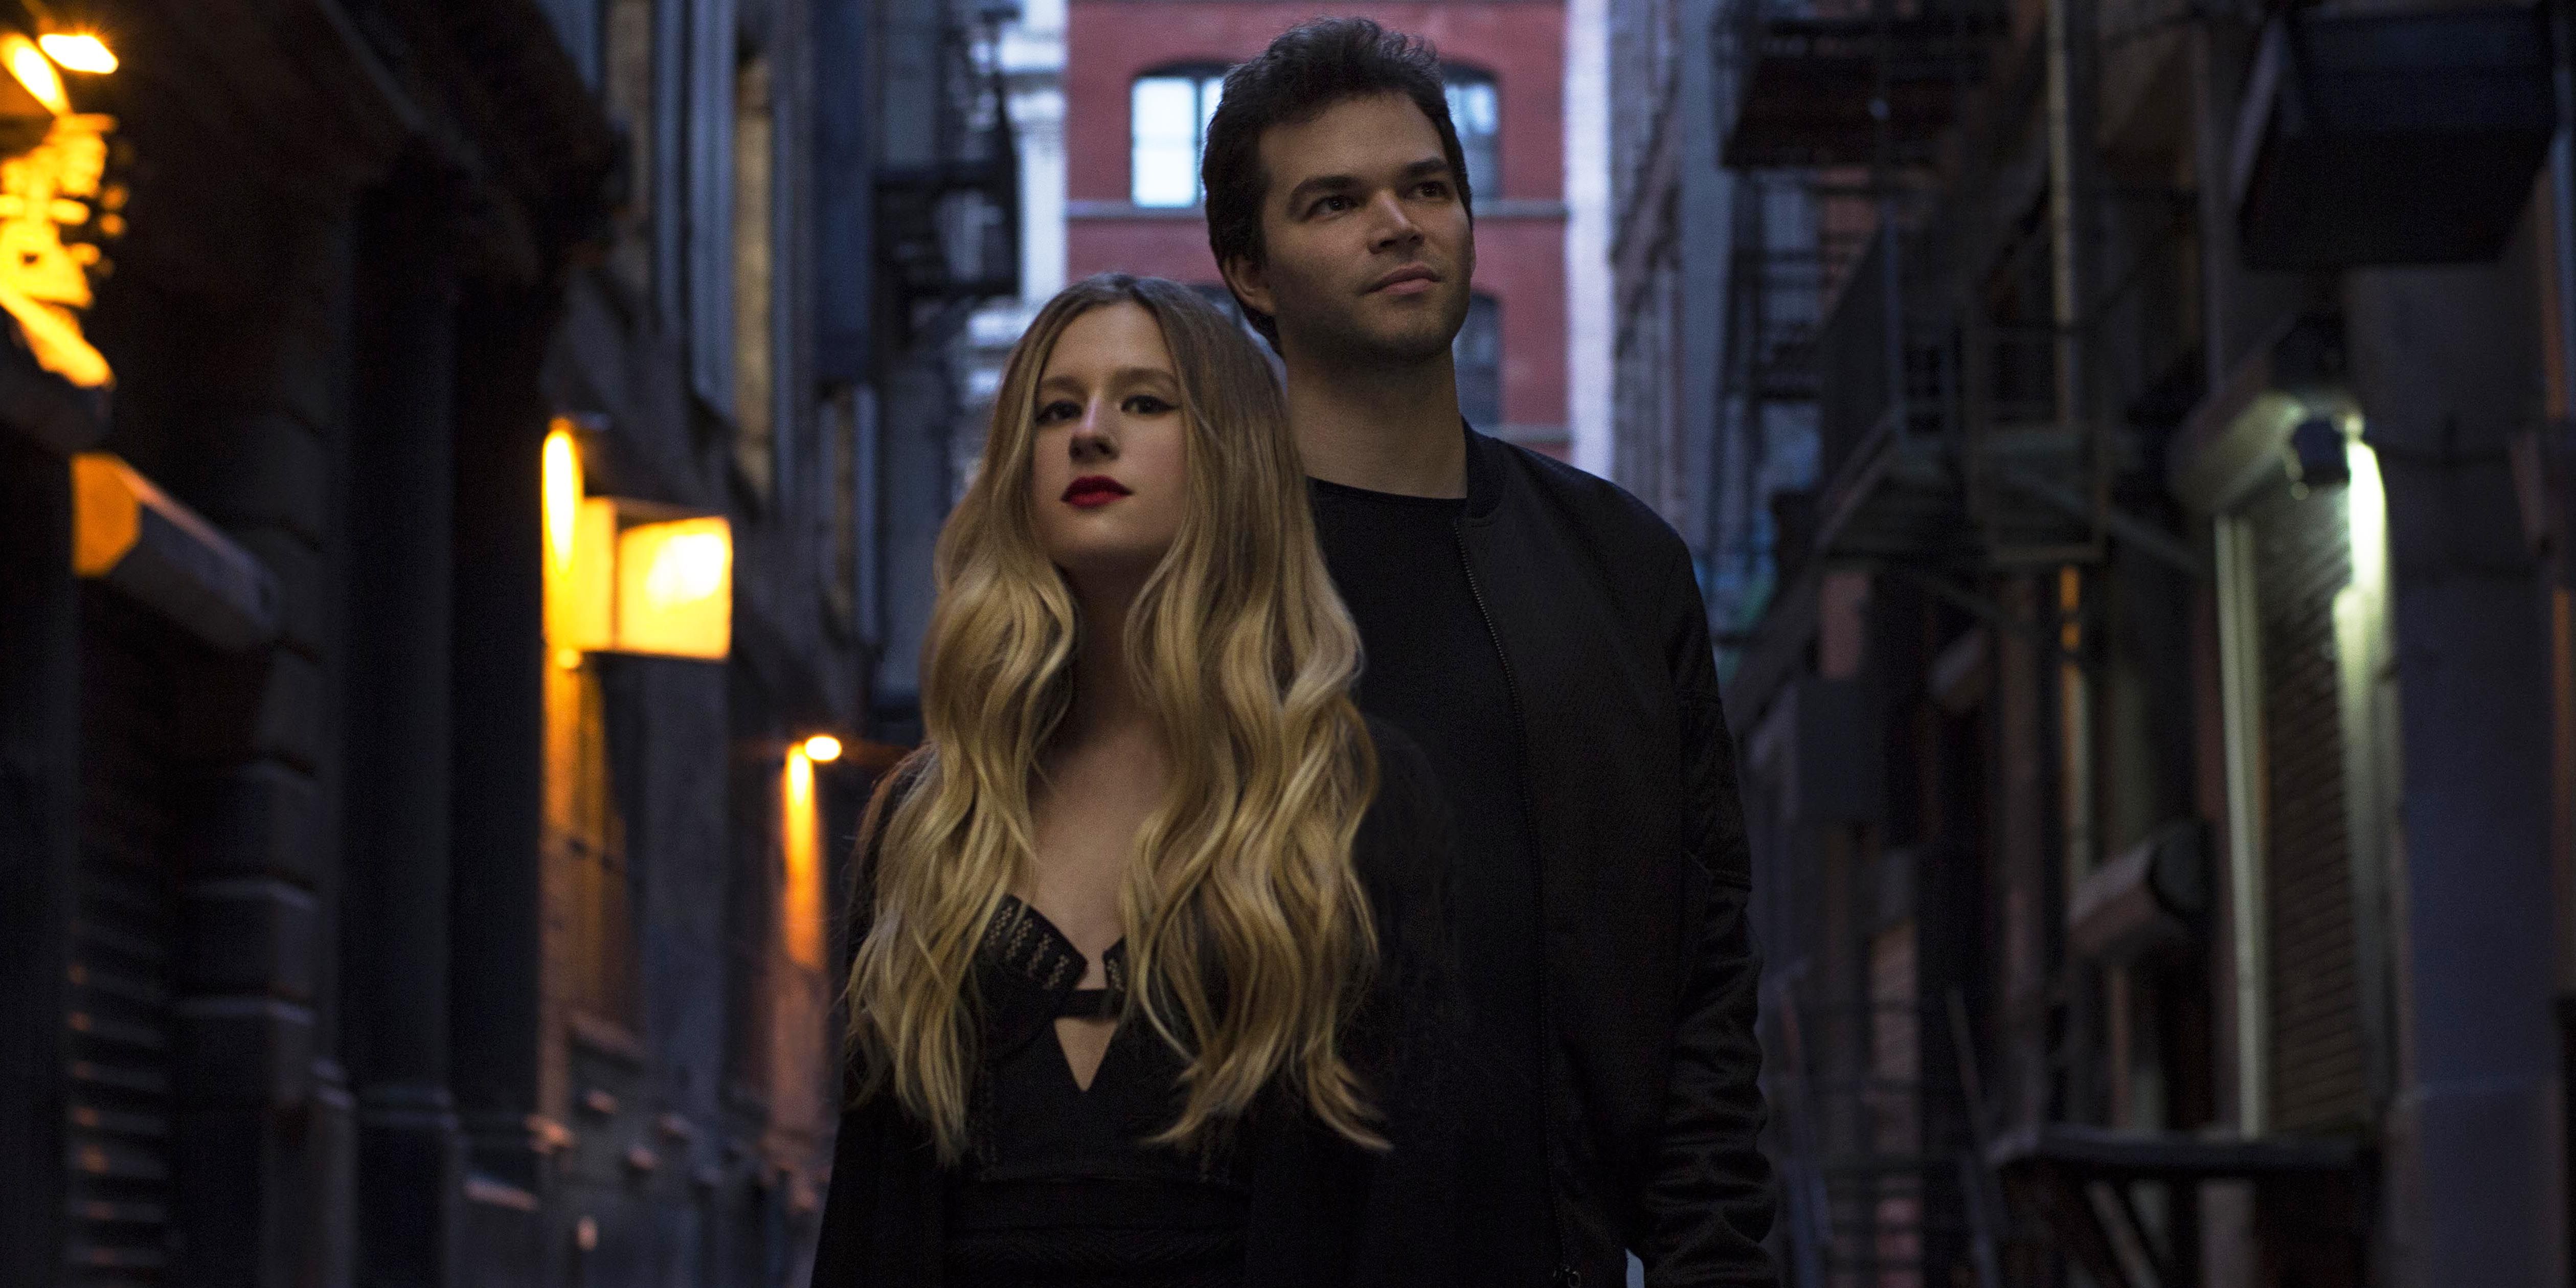 listen to down by marian hill